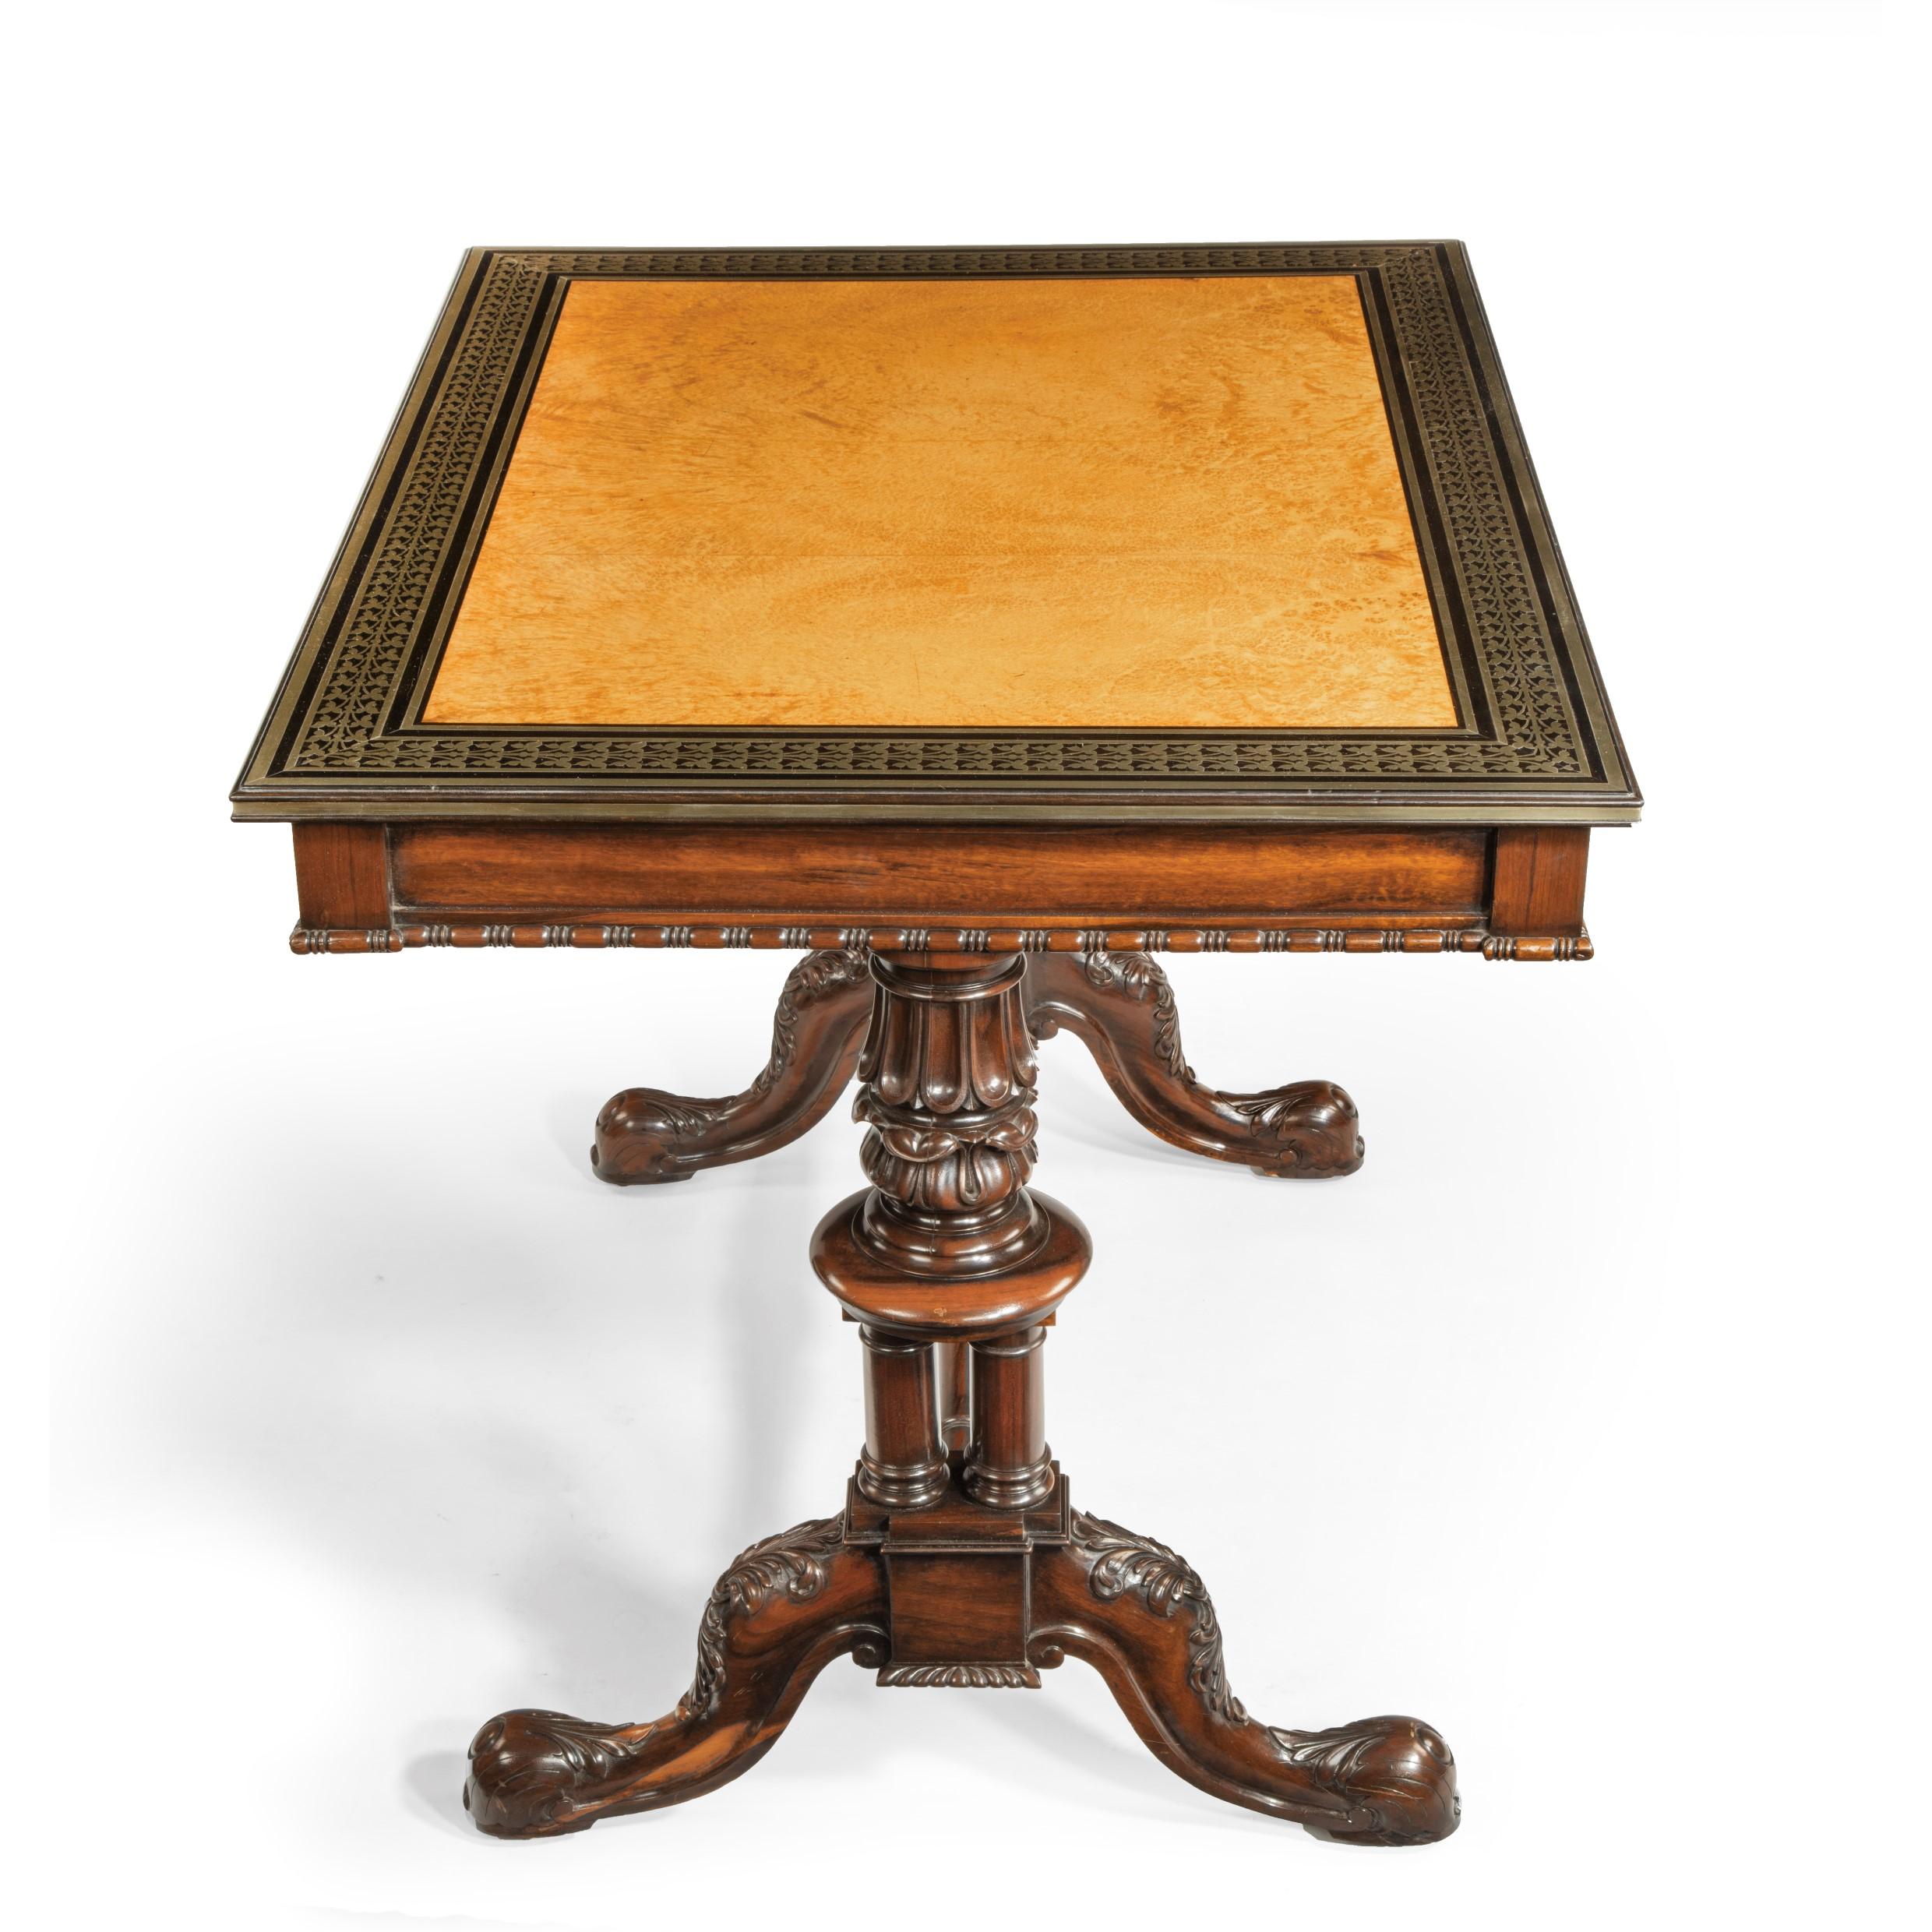 English Striking Goncalo Alves 'Albuera Wood' Writing Table Attributed to Gillows